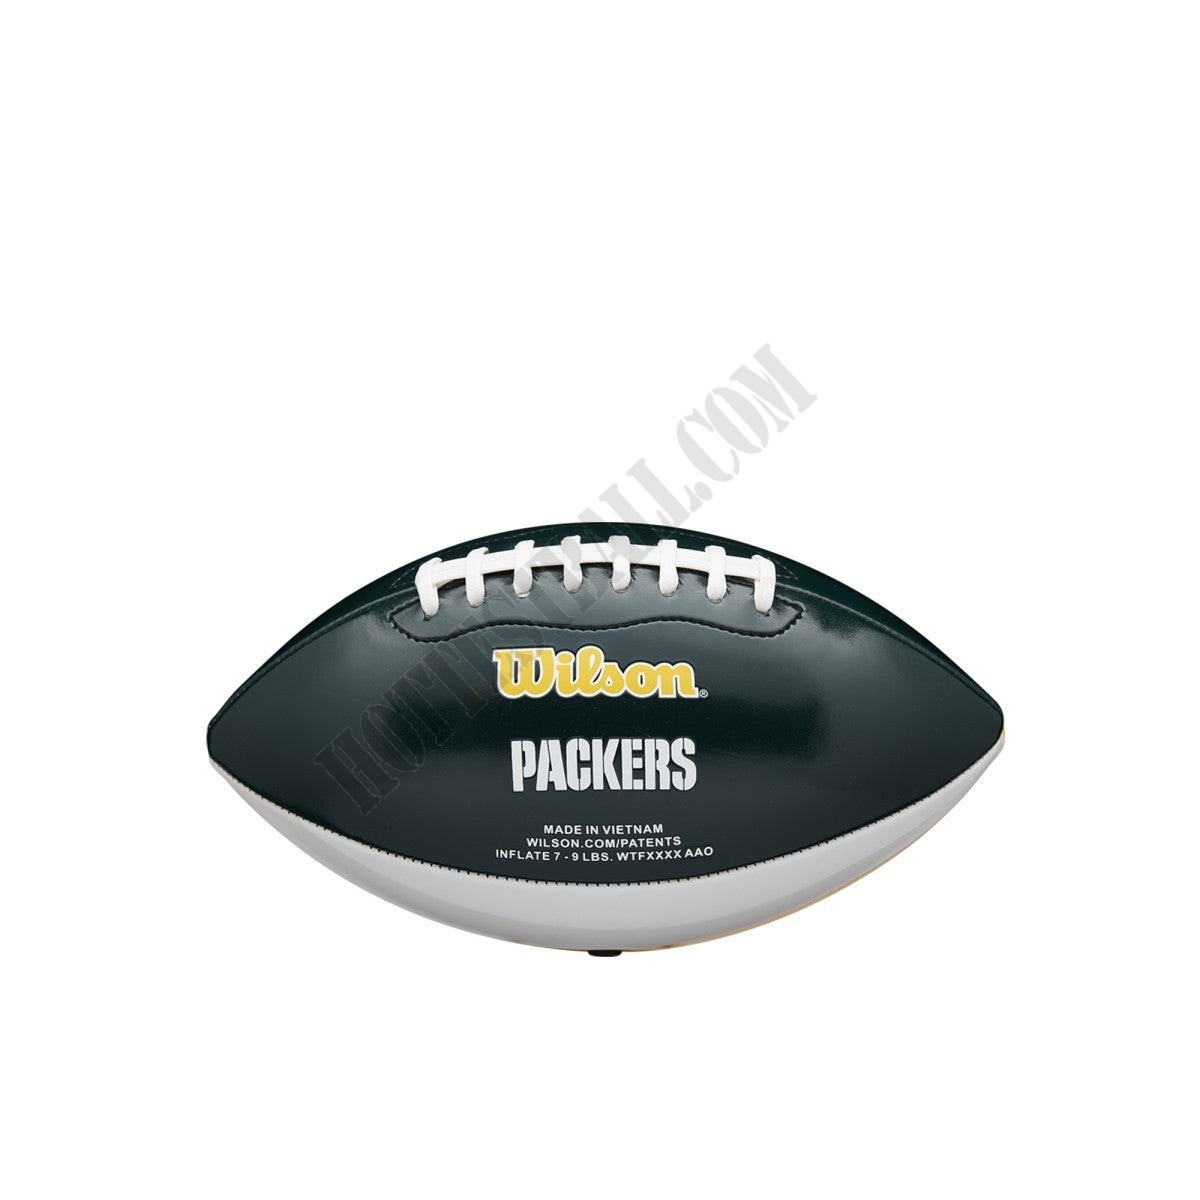 NFL City Pride Football - Green Bay Packers ● Wilson Promotions - -1